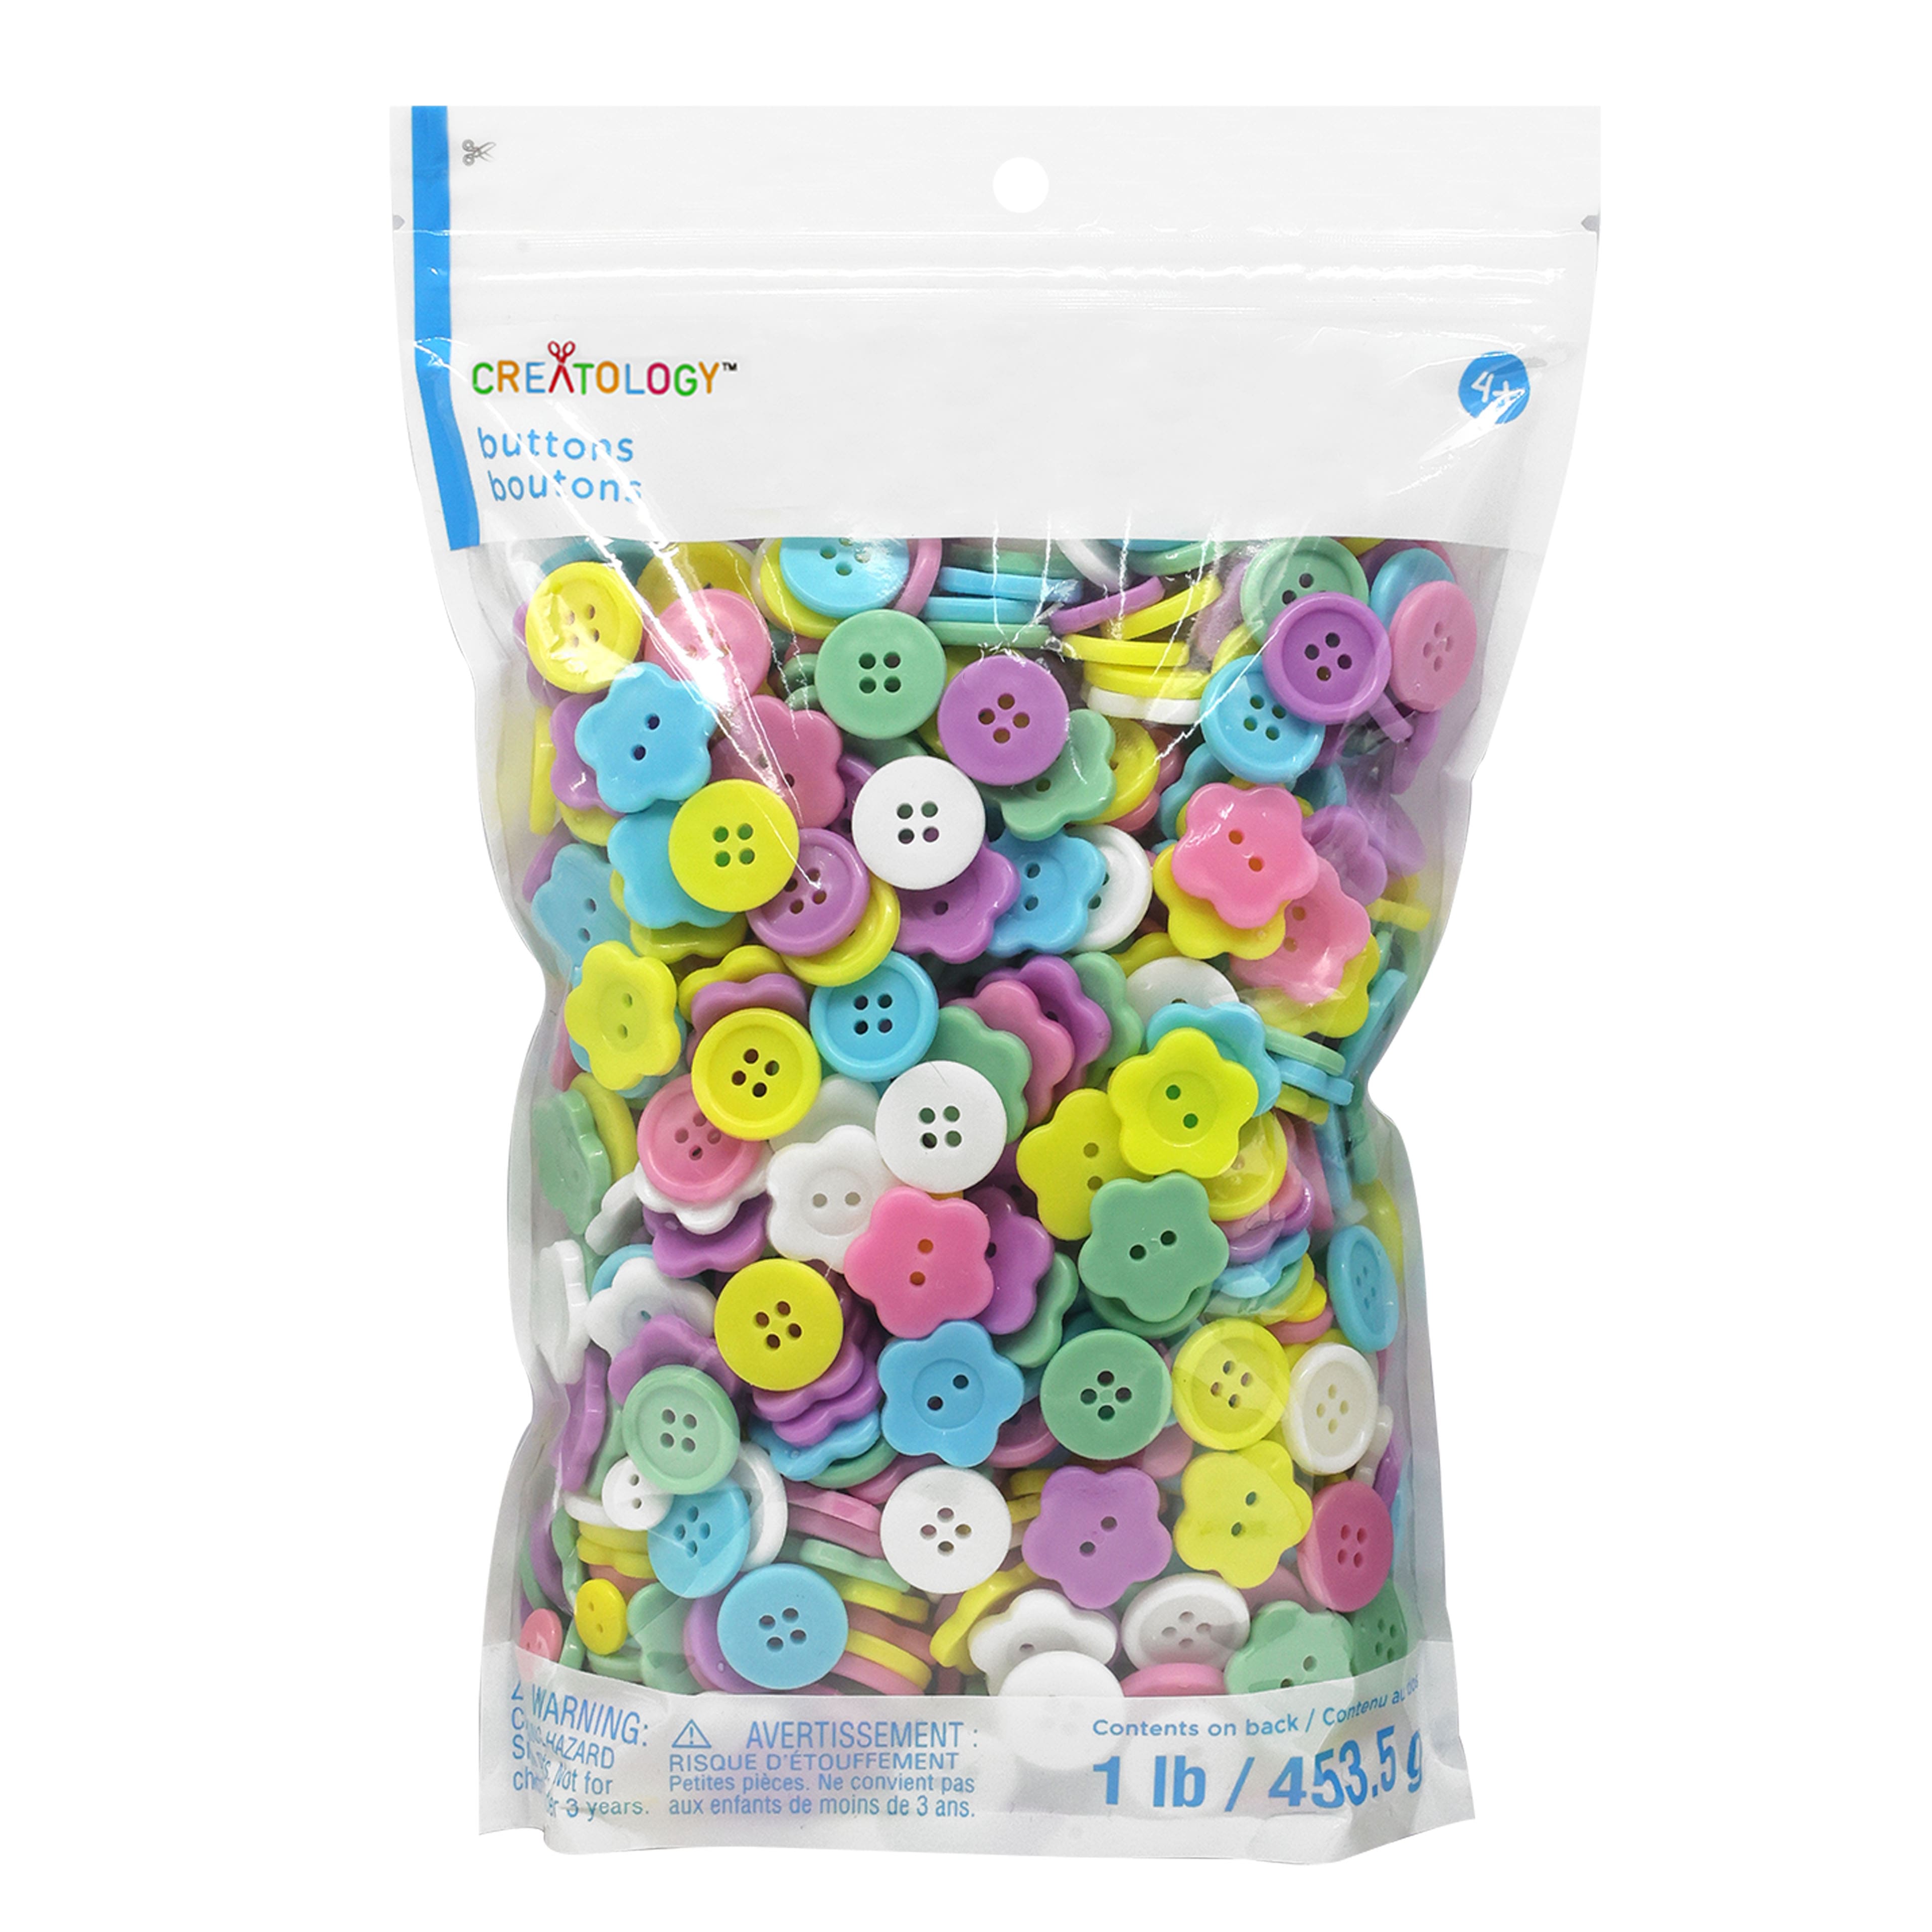 Bright Craft Buttons - 5 lbs. by Roylco